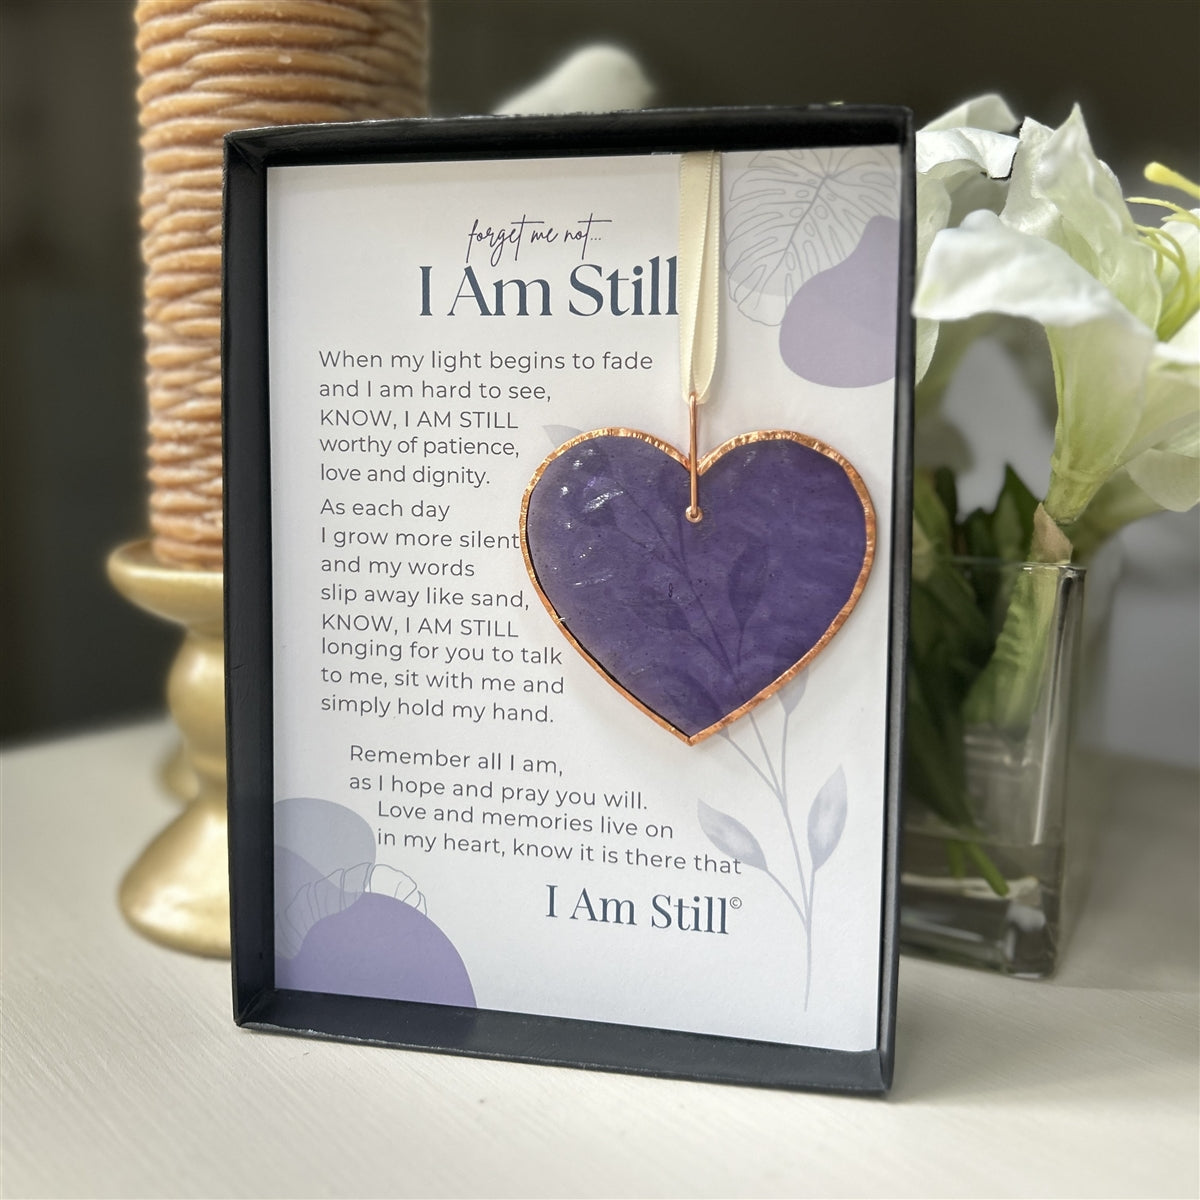 Alzheimer/Dementia Family Support Gift: Periwinkle stained glass heart with copper edging and ring packaged with "I am Still" Poem in a black box with a clear lid